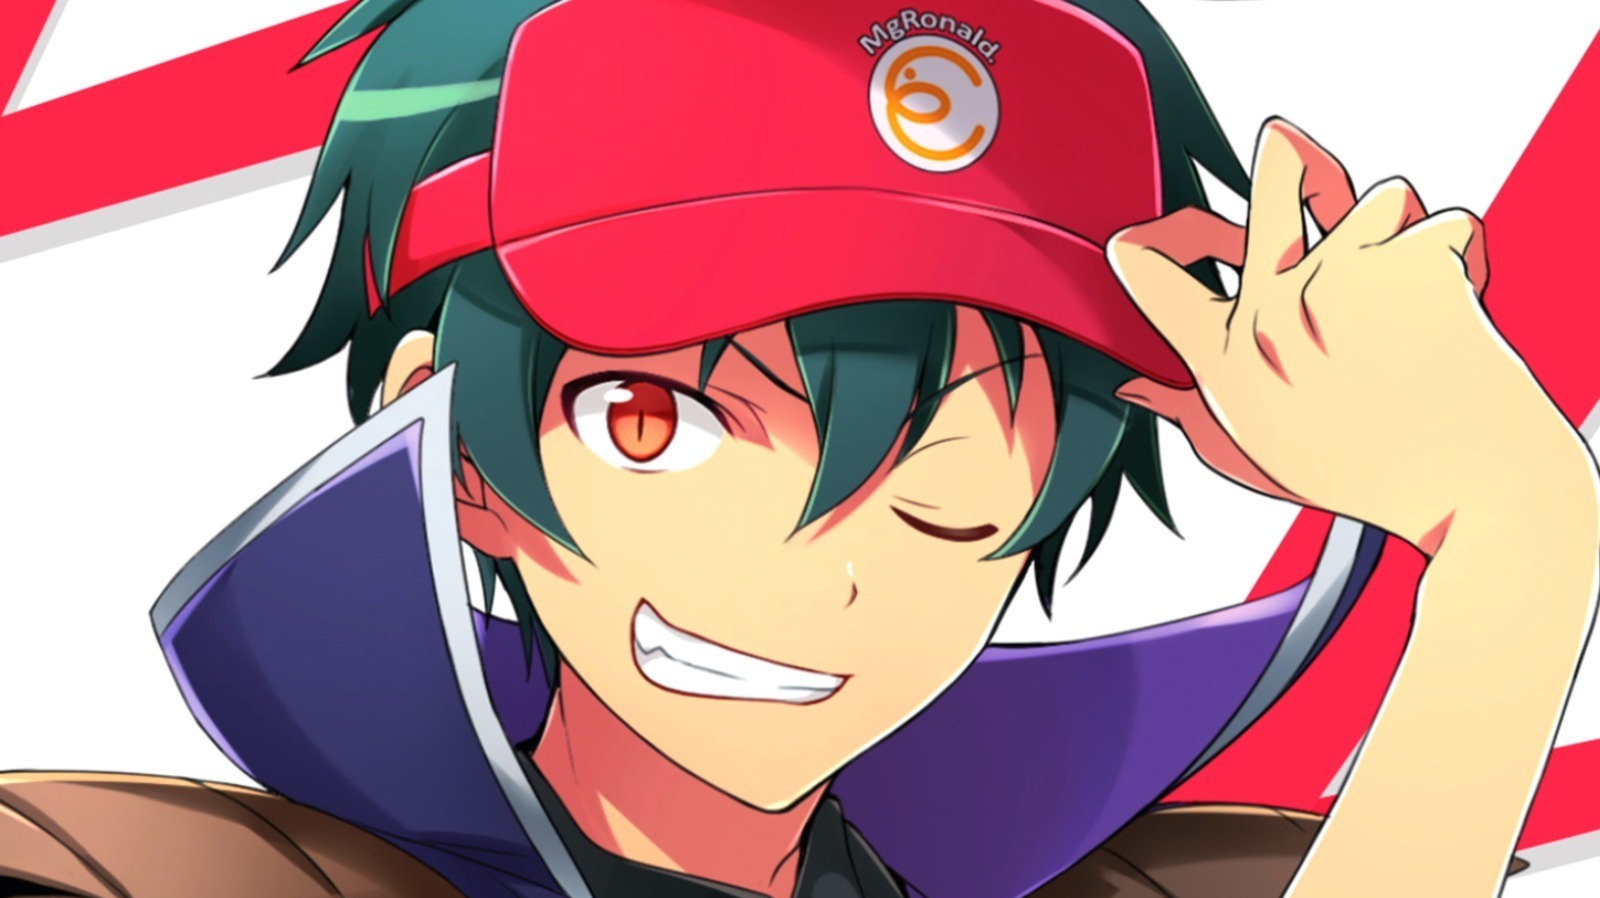 The Devil Is A Part-Timer! Season 2 Episode 2 Release Date And Time